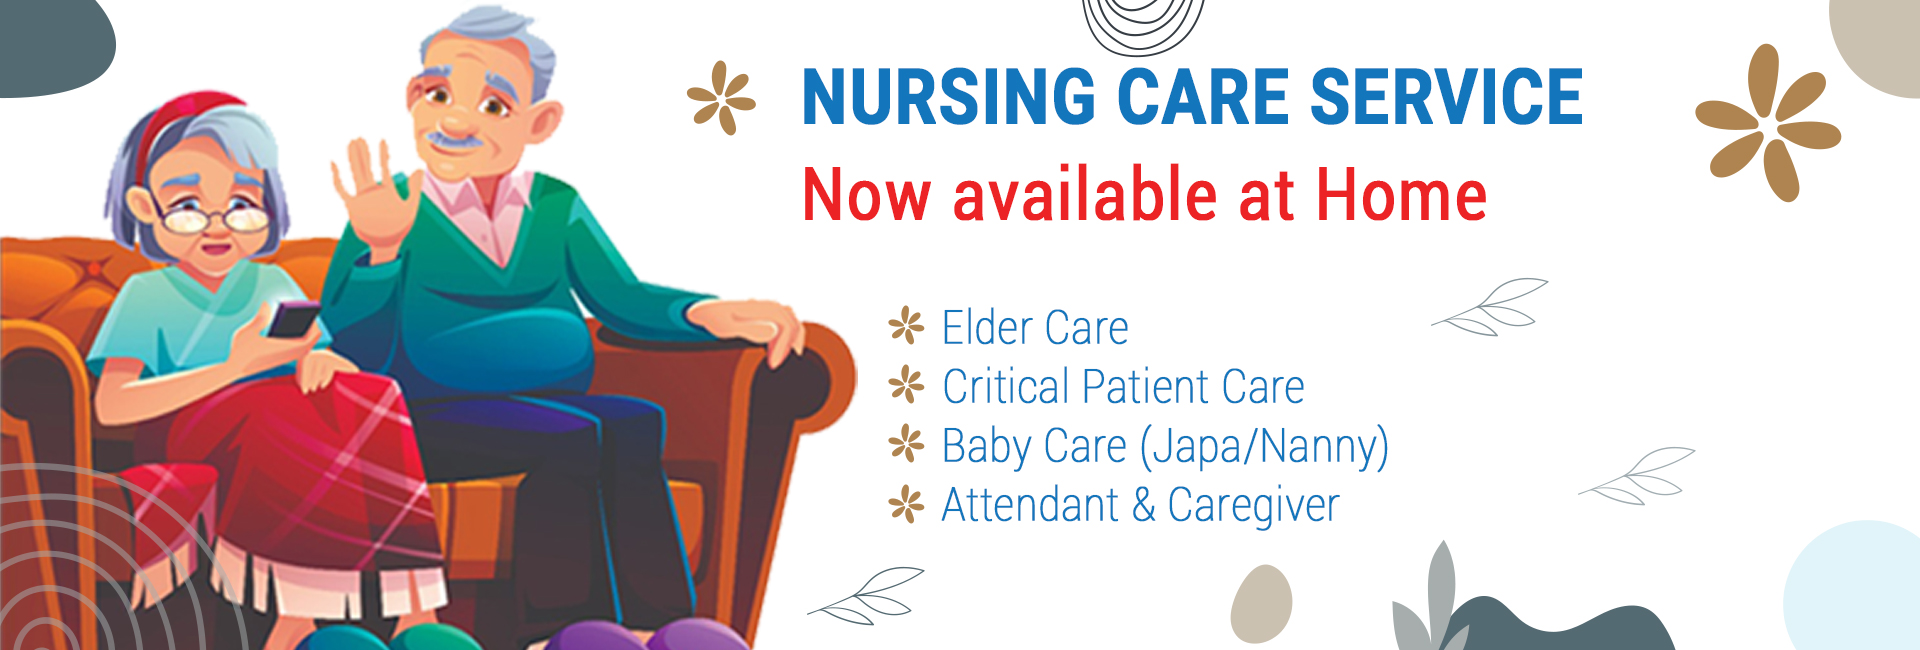 Nursing Services at Home